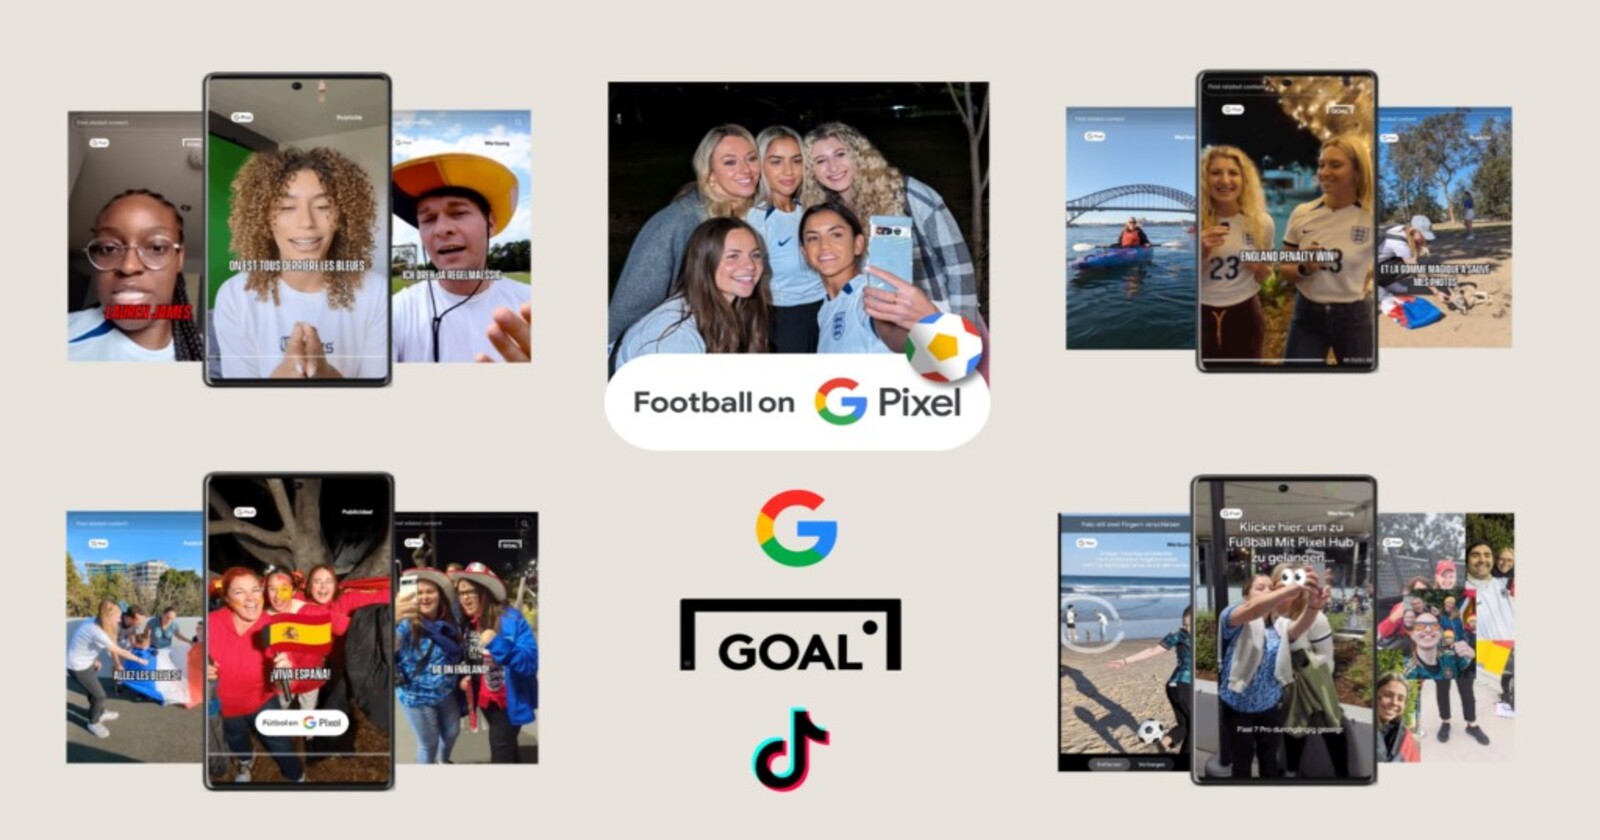 Google Pixel with GOAL and TikTok have reportedly reduced the visibility gap in Women's Football